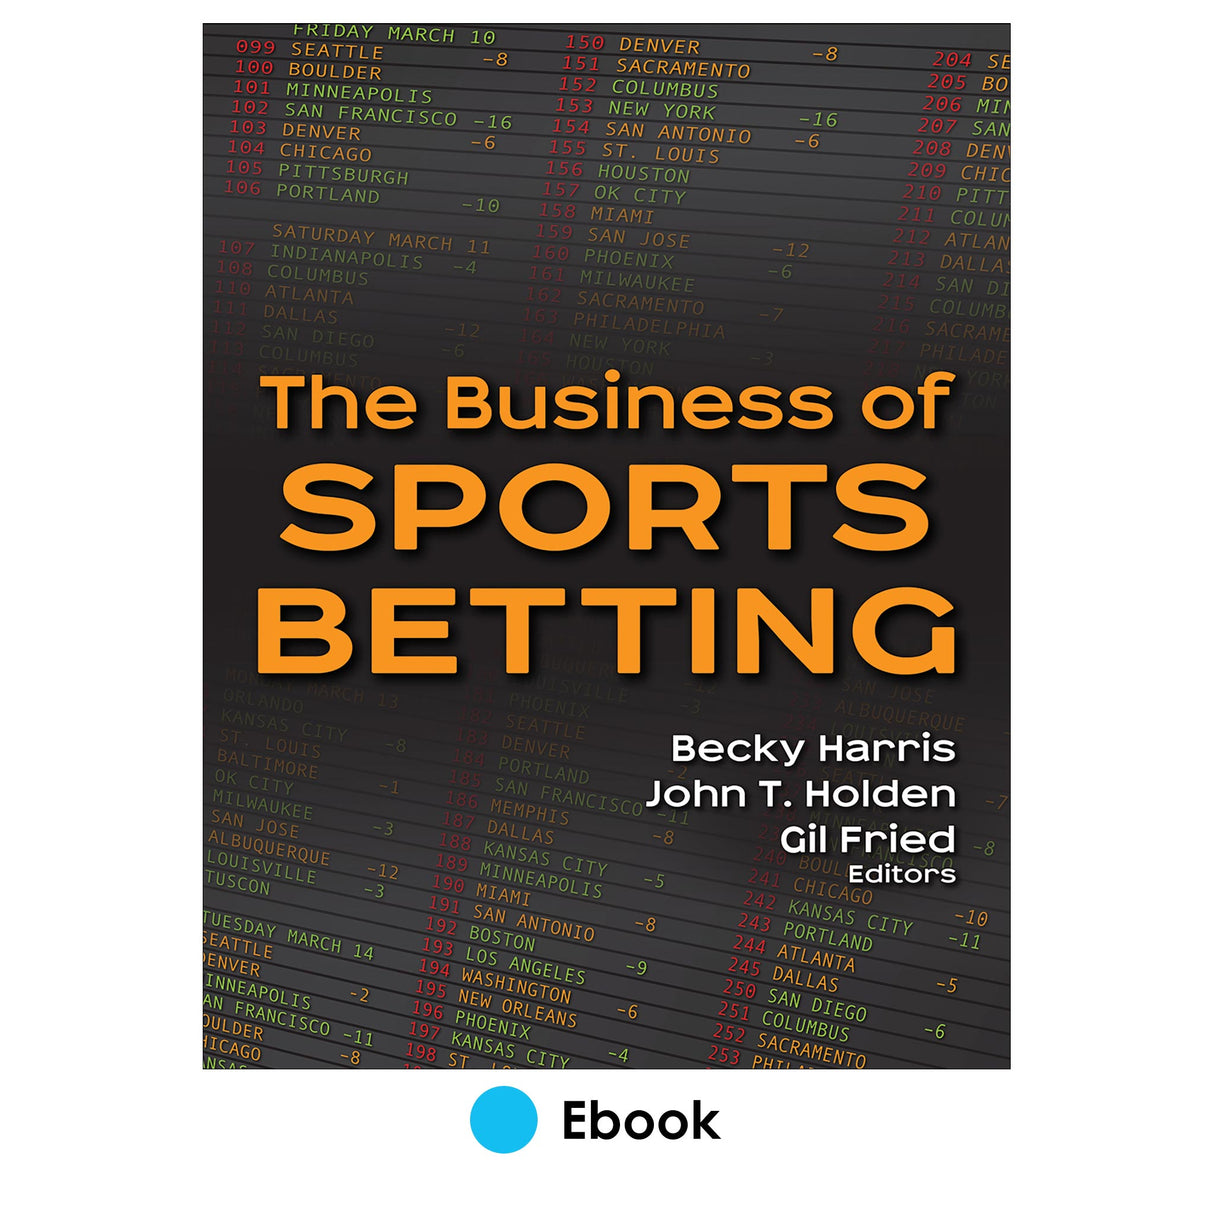 Business of Sports Betting epub, The